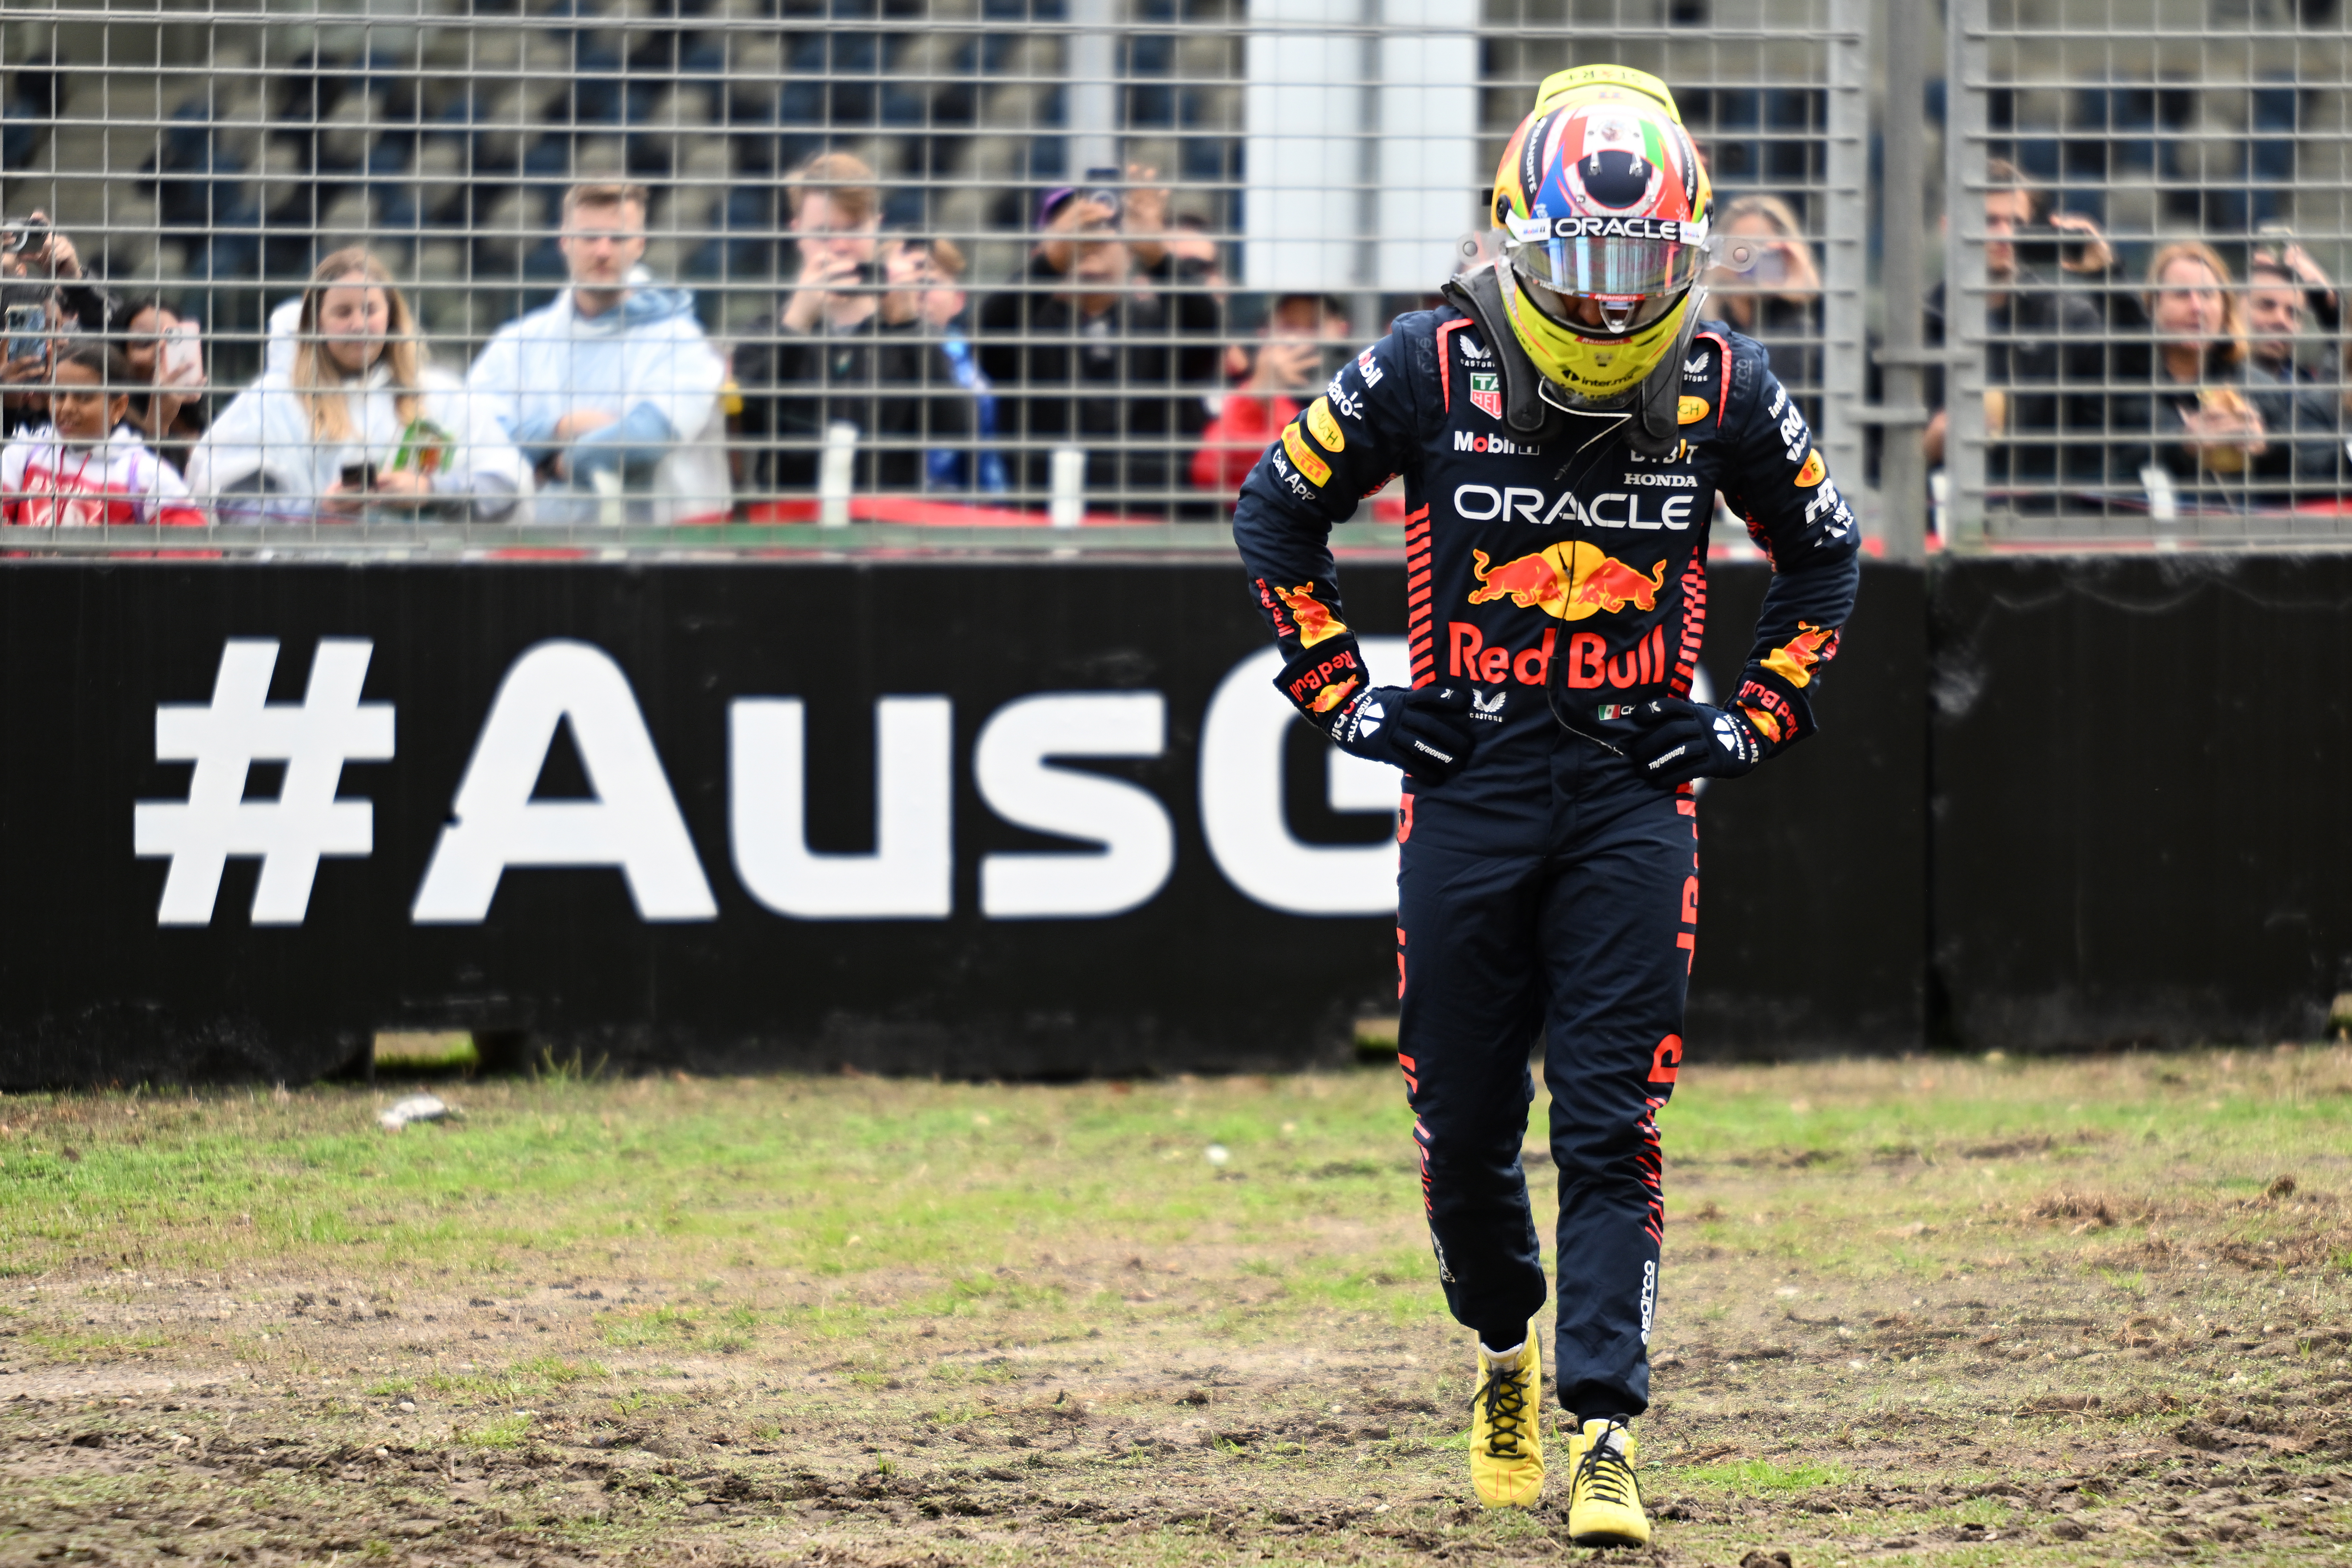 Melbourne (Australia), 01/04/2023.- Sergio Perez of Red Bull Racing reacts after running his car off the track during qualifying at the 2023 Australian Grand Prix at the Albert Park Circuit in Melbourne, Australia, 01 April 2023. (Fórmula Uno) EFE/EPA/JAMES ROSS AUSTRALIA AND NEW ZEALAND OUT
